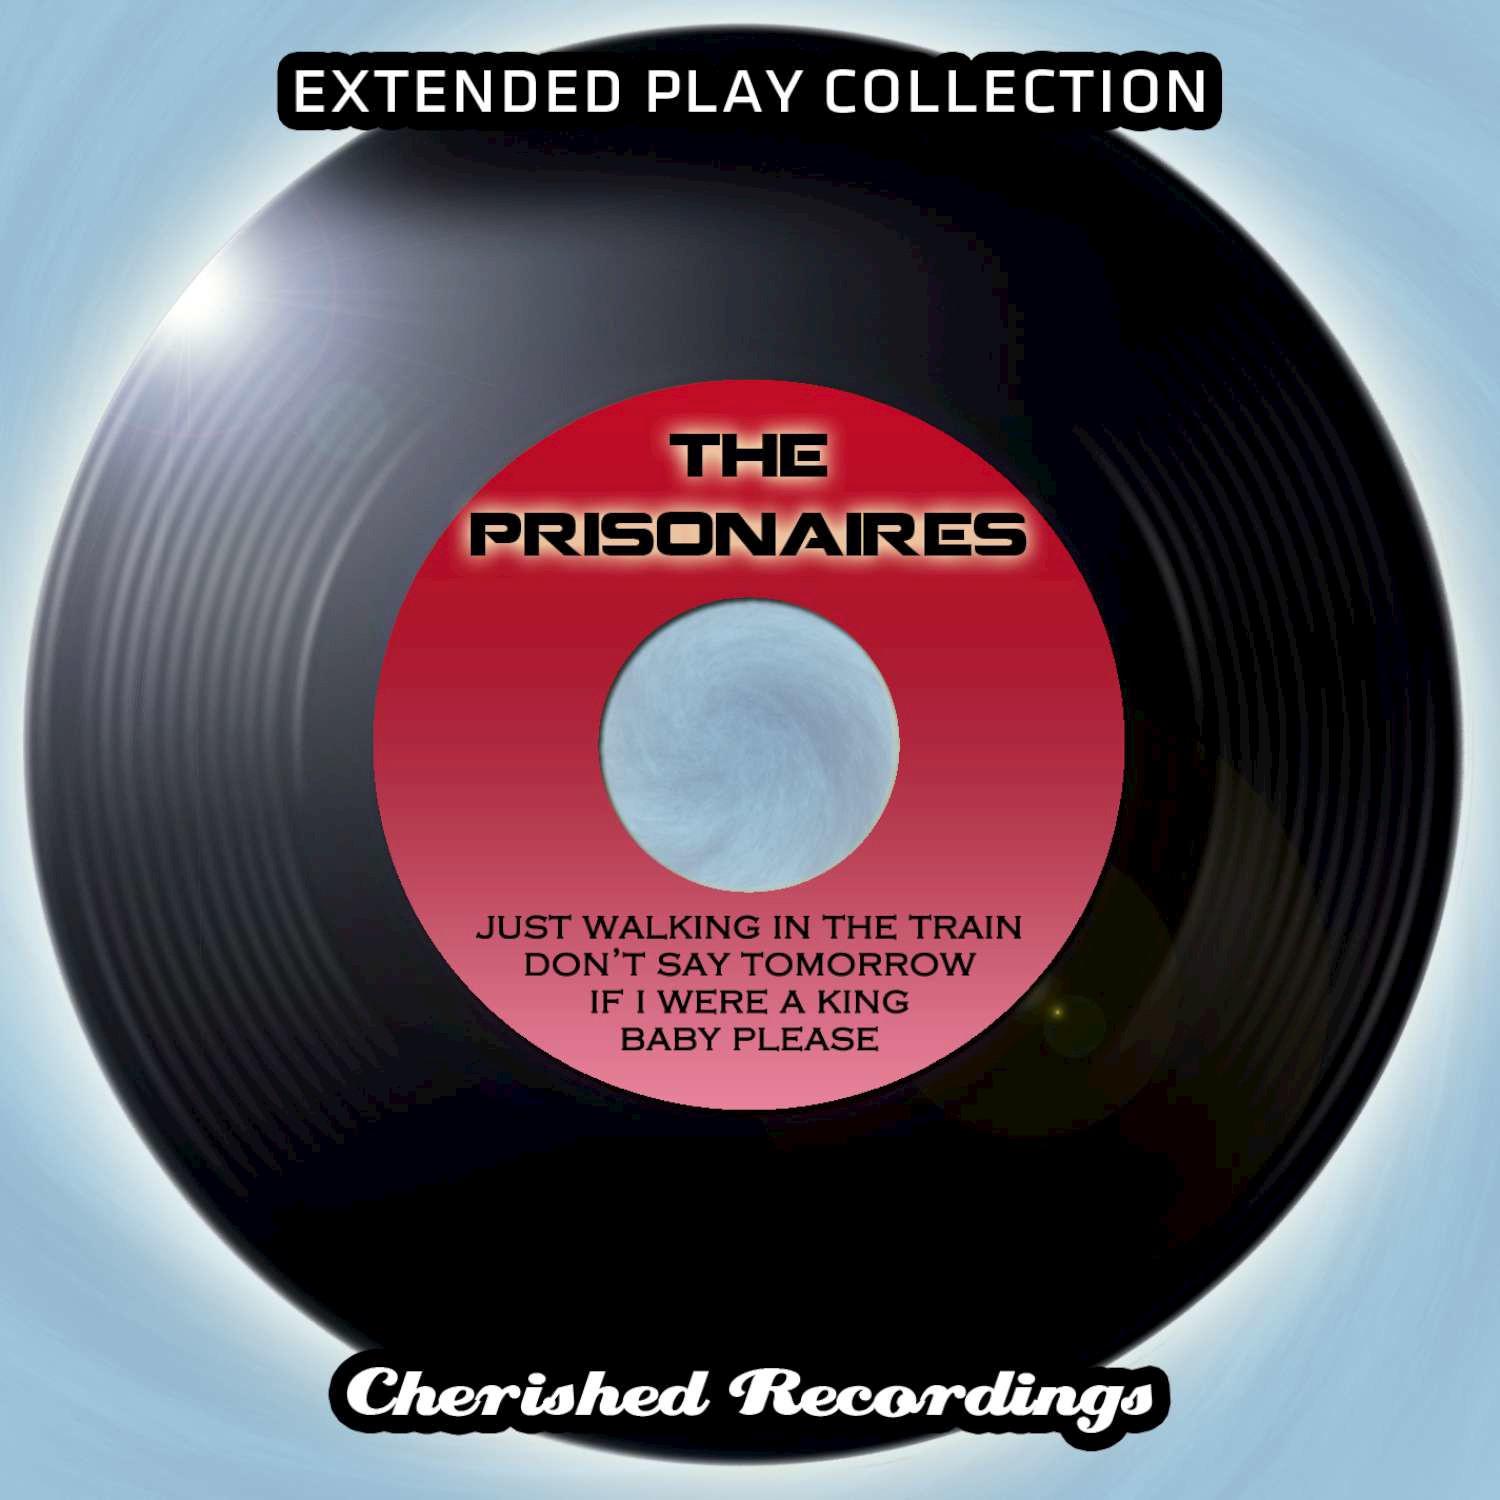 The Prisonaires - The Extended Play Collection, Vol. 97